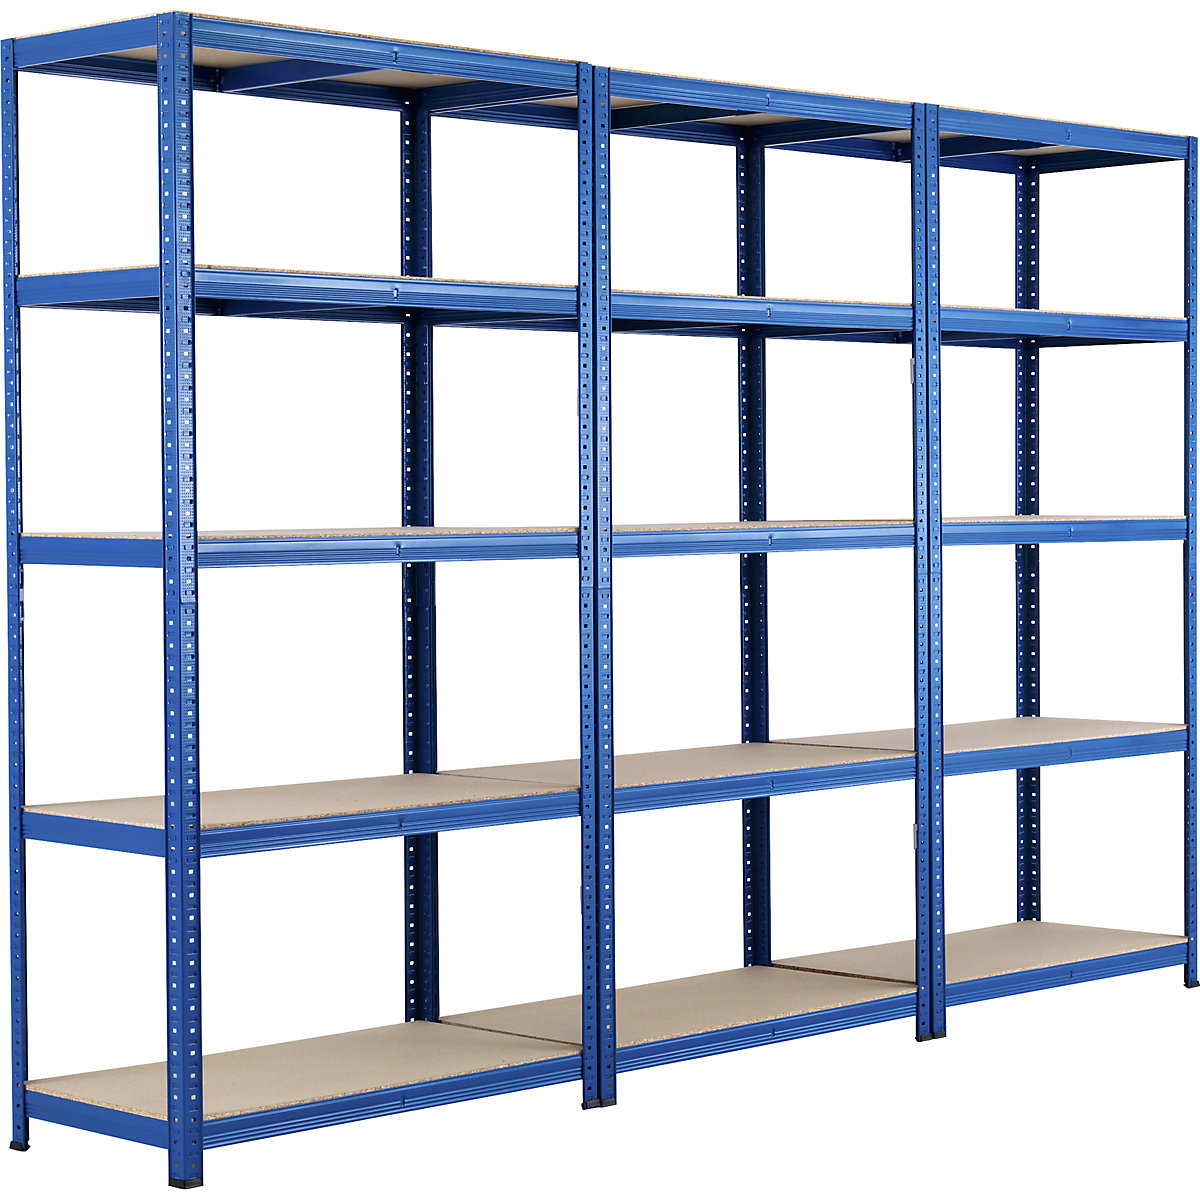 5 Moulded Chipboard Shelves Max Load, Warehouse Shelving Units Dimensions